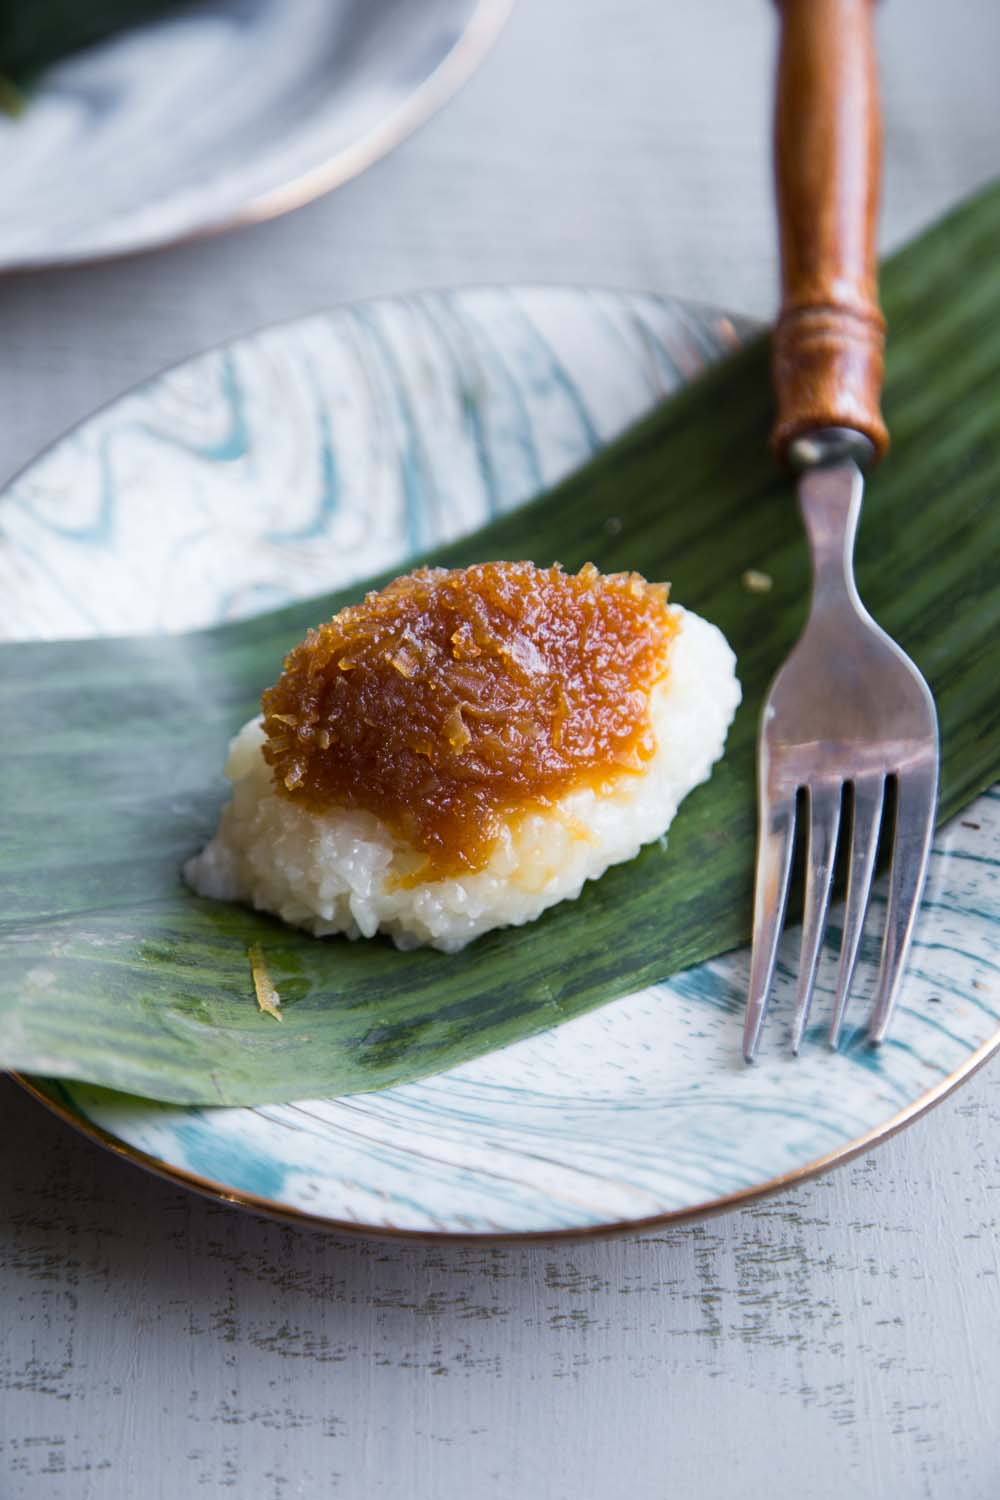 Nyonya Pulut Inti (Glutinous Rice With Sweet Coconut Topping)